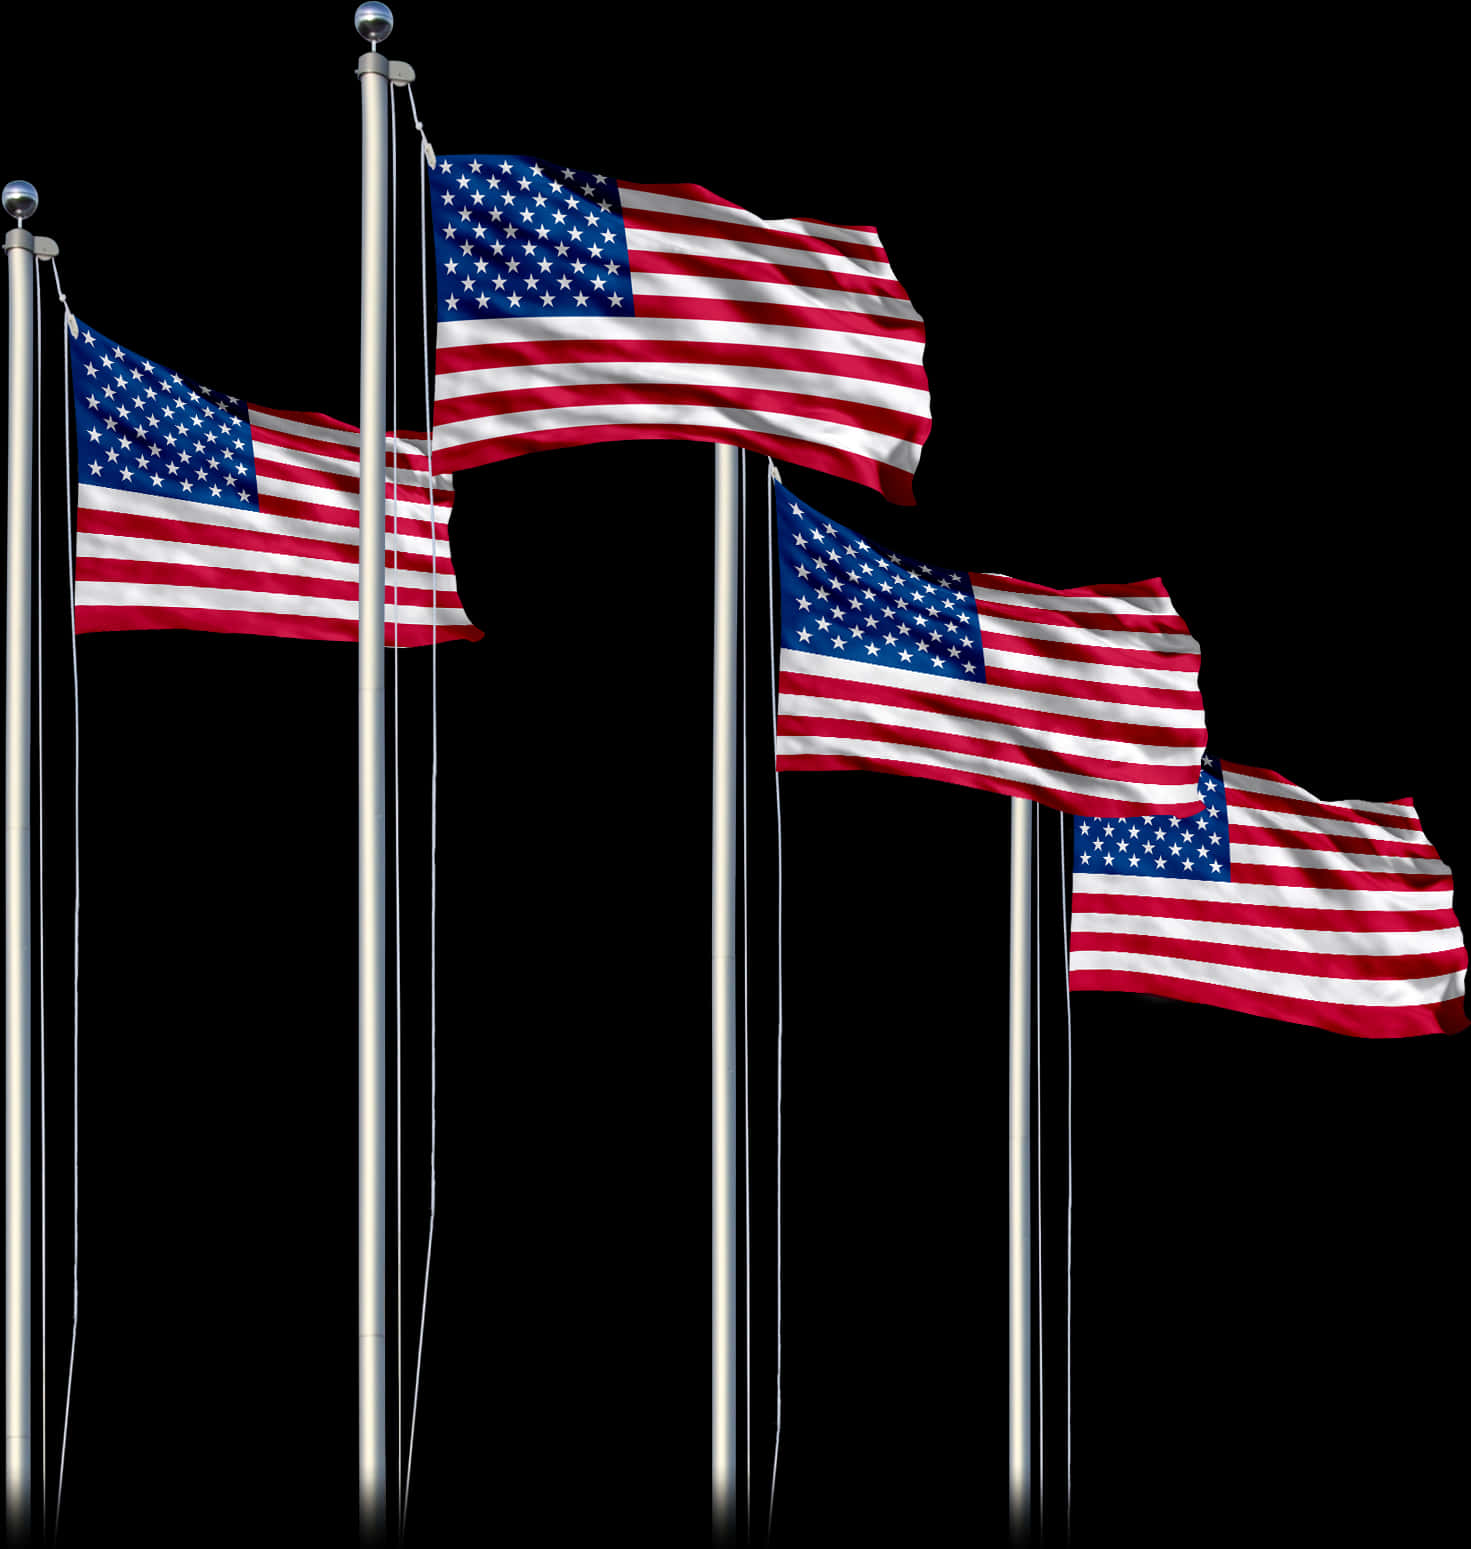 A Group Of Flags On Poles